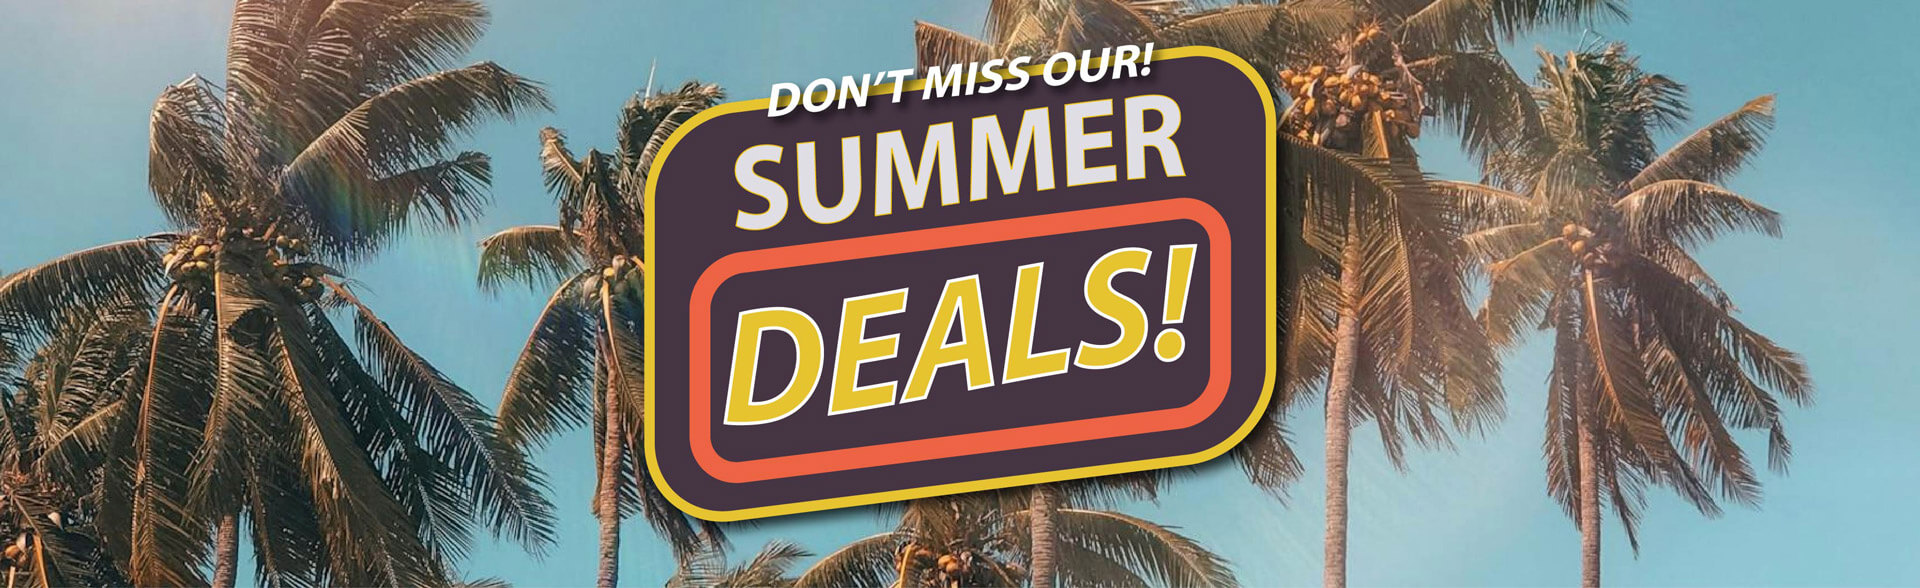 Great Summer Dealers! Check out Discount Motors' Best Deals of the Season